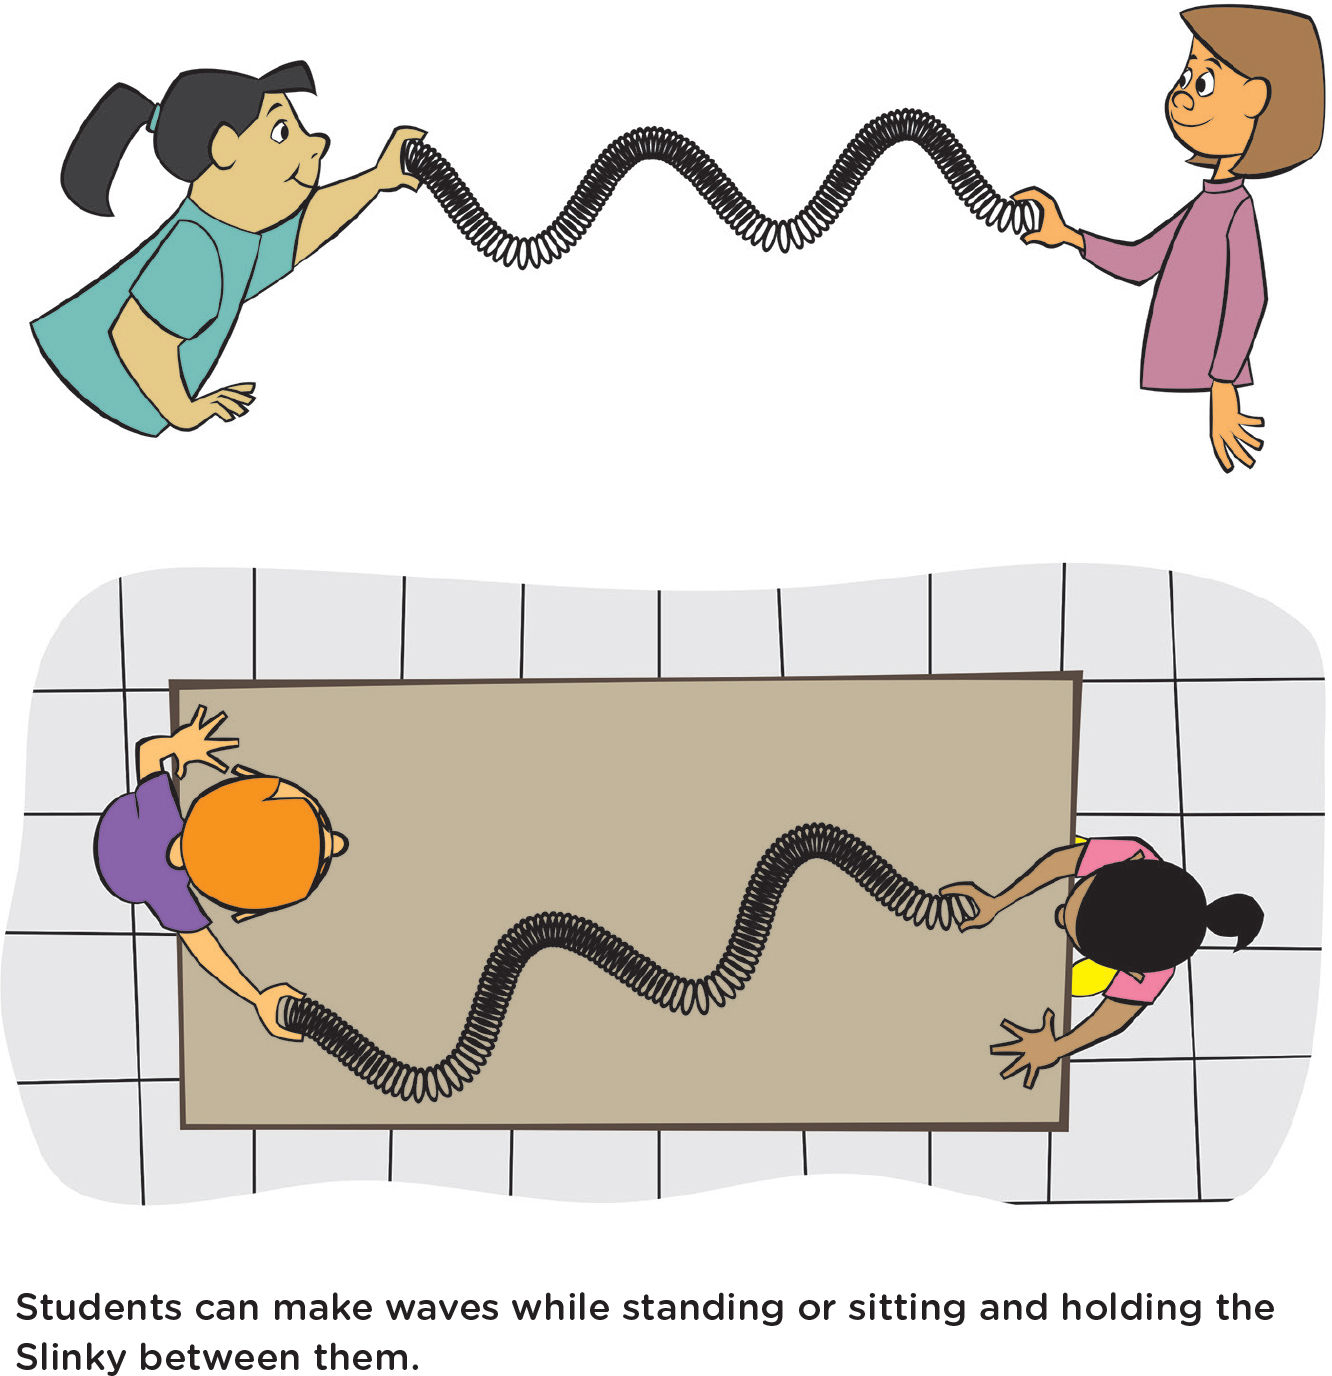 Students can make waves while standing or sitting and holding the Slinky between them.